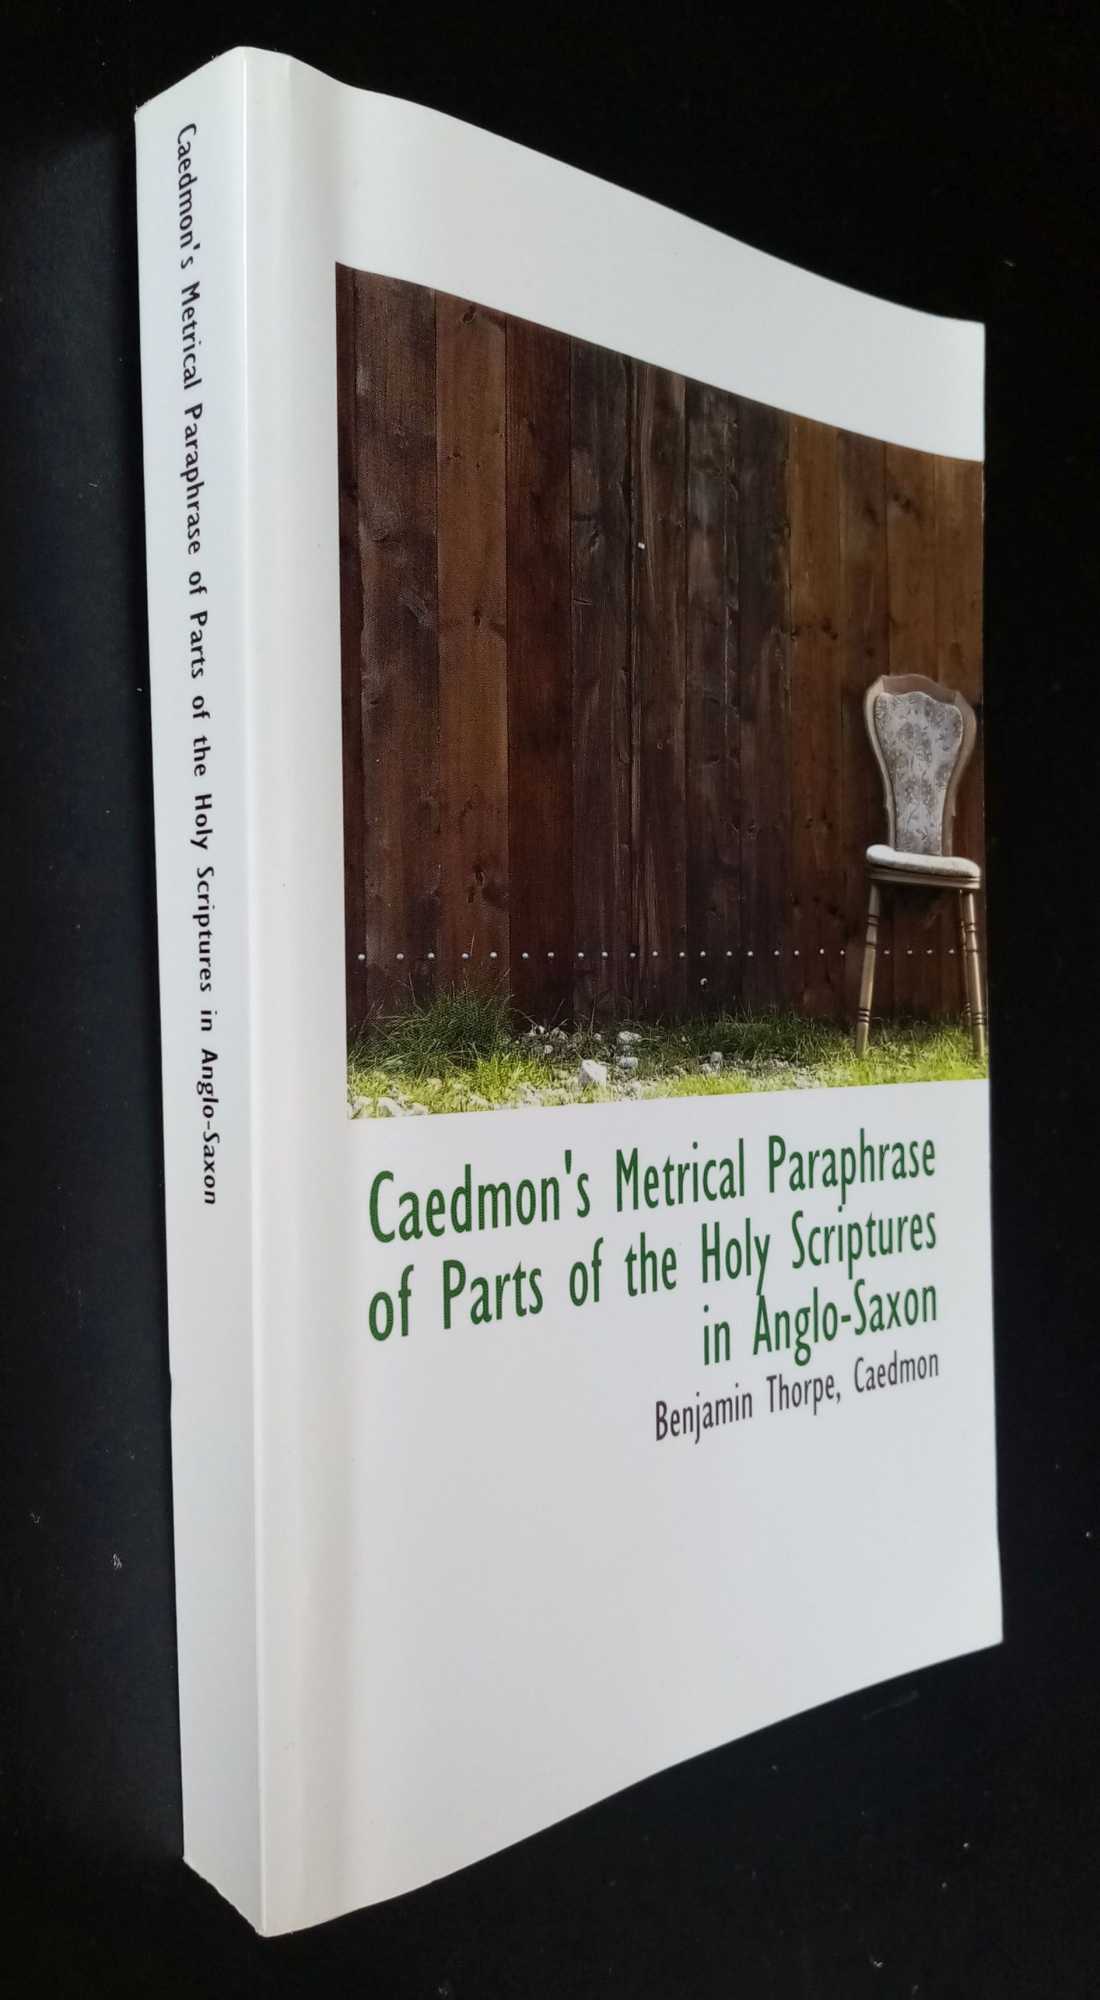 Benjamin Caedmon - Caedmon's Metrical Paraphrase of Parts of the Holy Scriptures in Anglo-Saxon